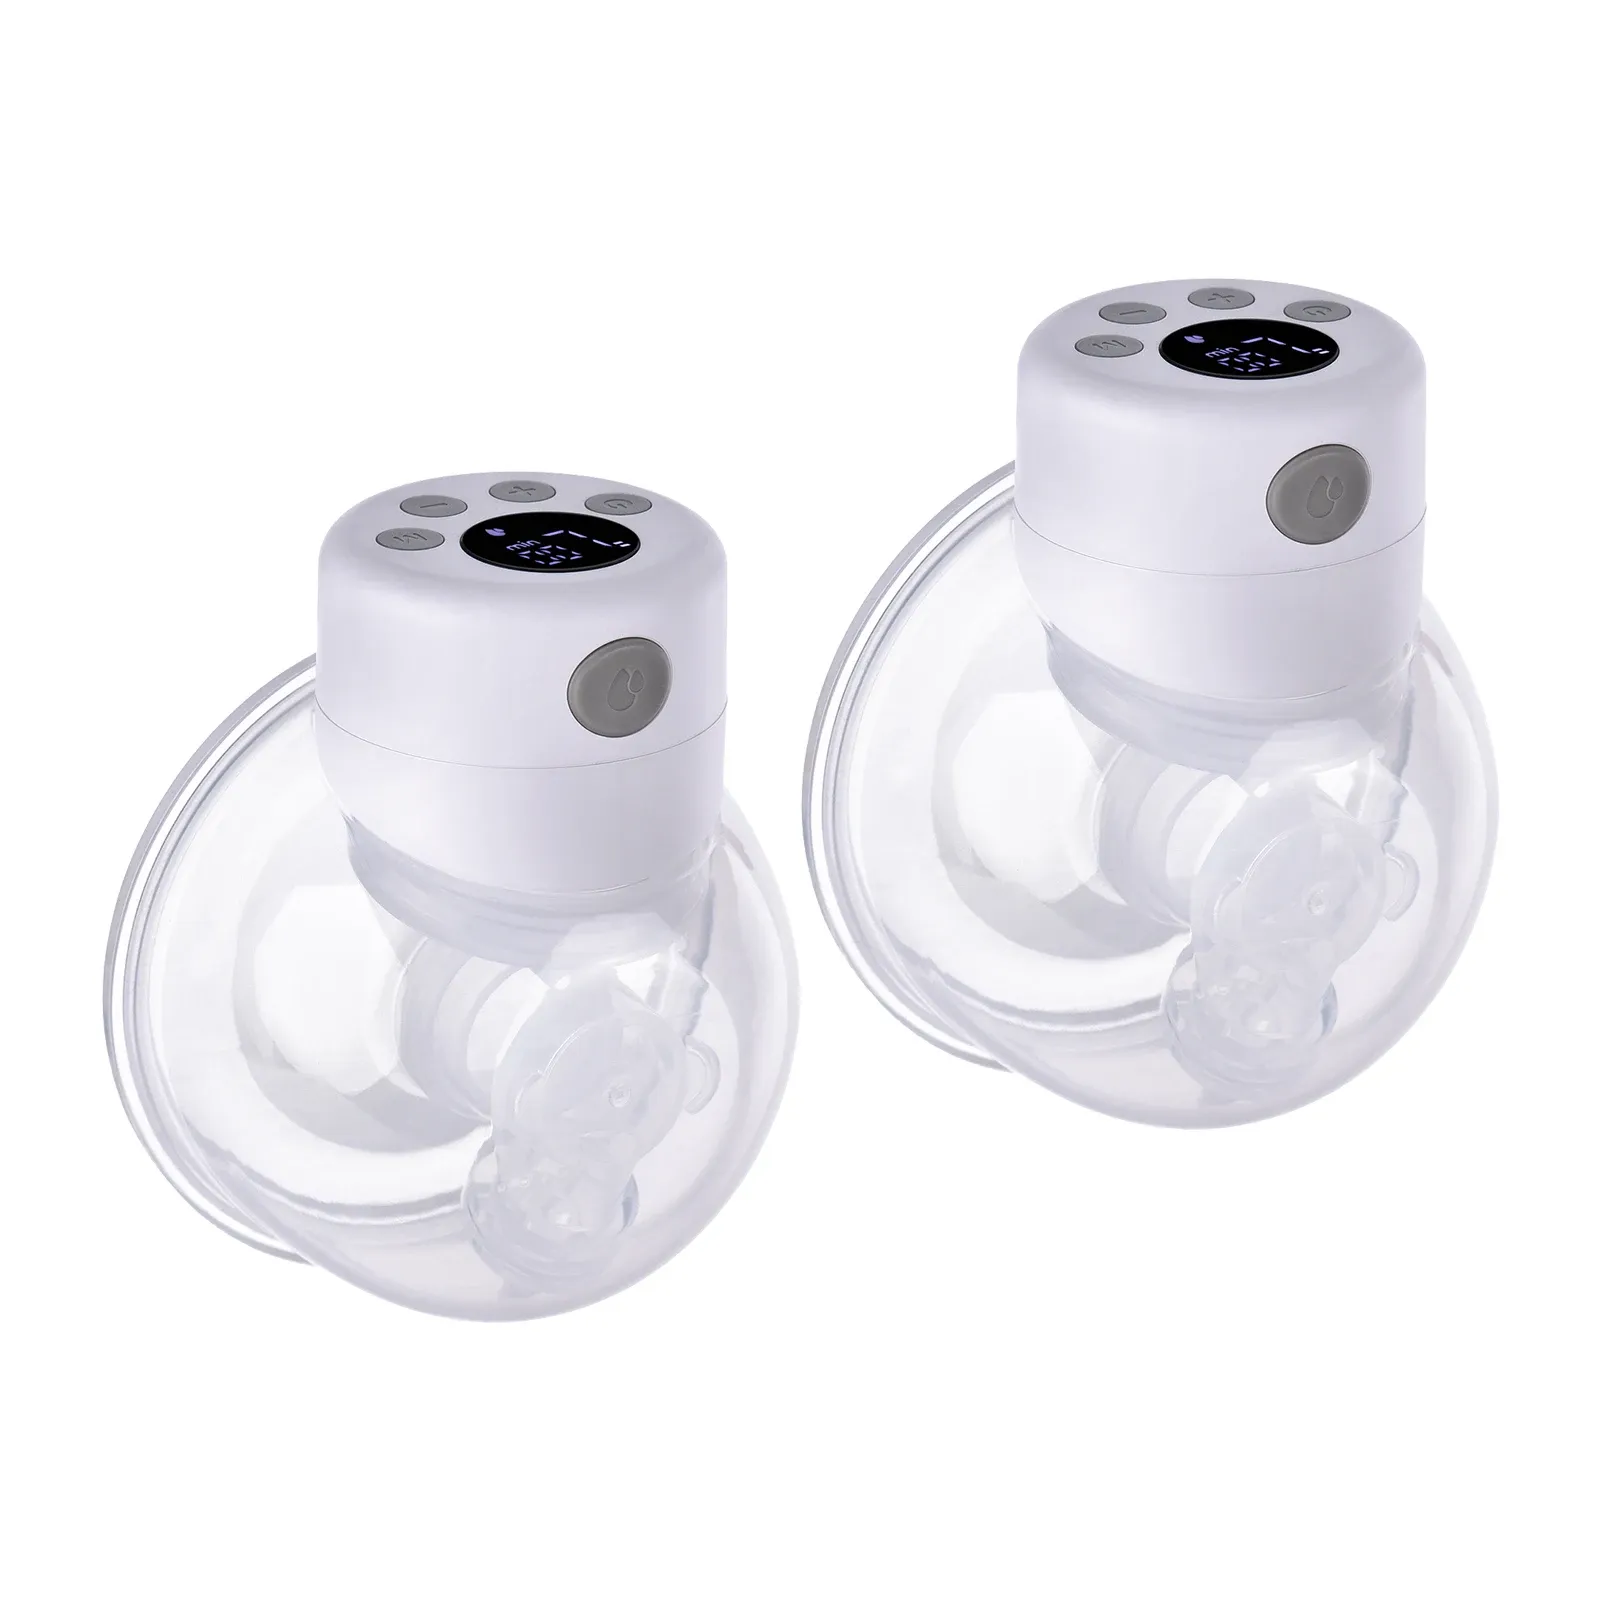 Enhancer S12 Wearable Electric Breast Pump Silent Invisible Hands Free Breast Pump Comfort Milk Collector Milk Puller BPAfree for Home